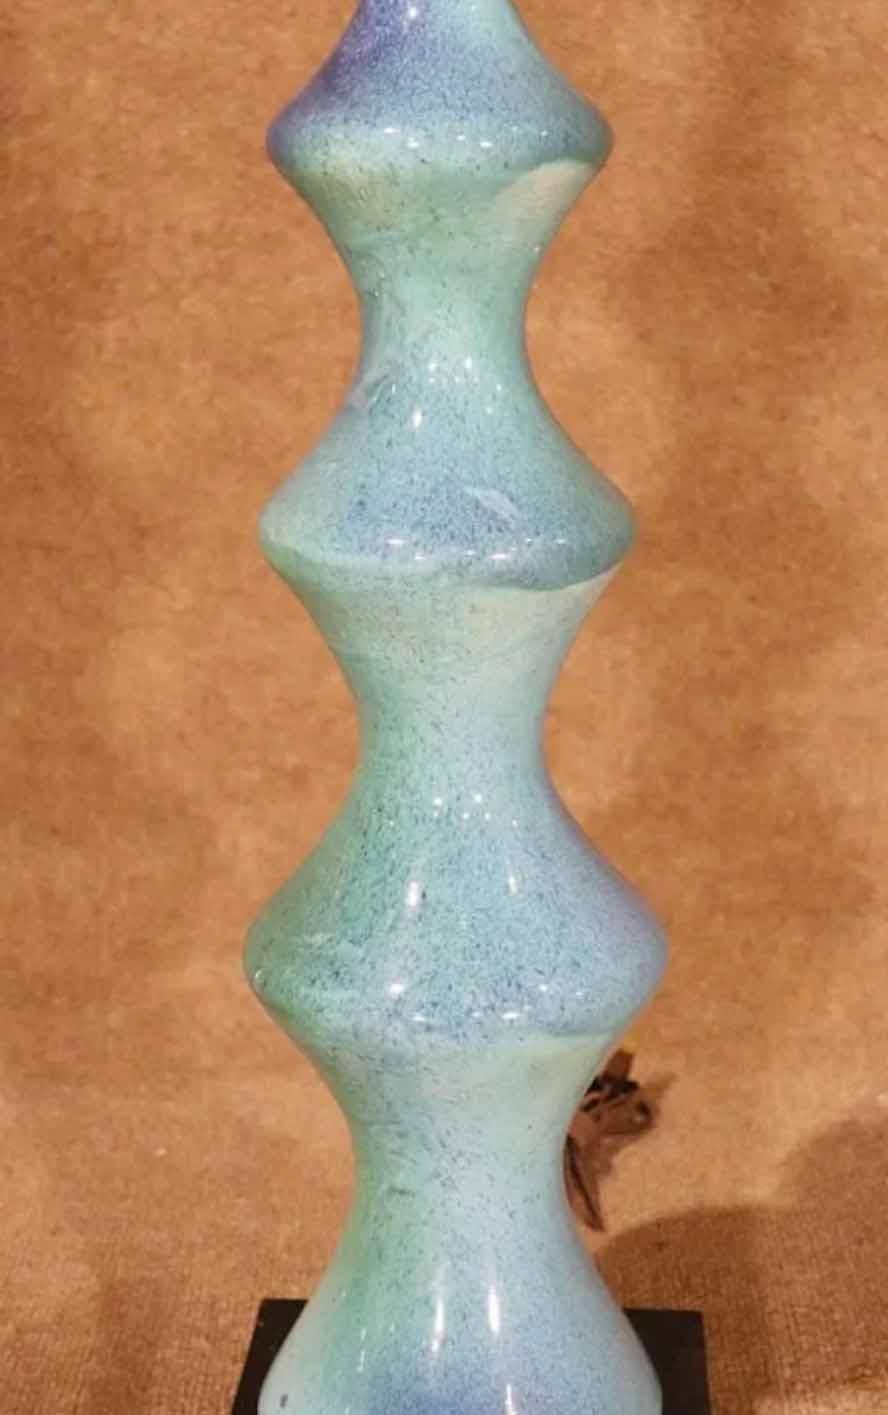 Mid-Century Modern table lamp in shades of turquoise. Sculpted ceramic shape on a black wood block.
Please confirm location.